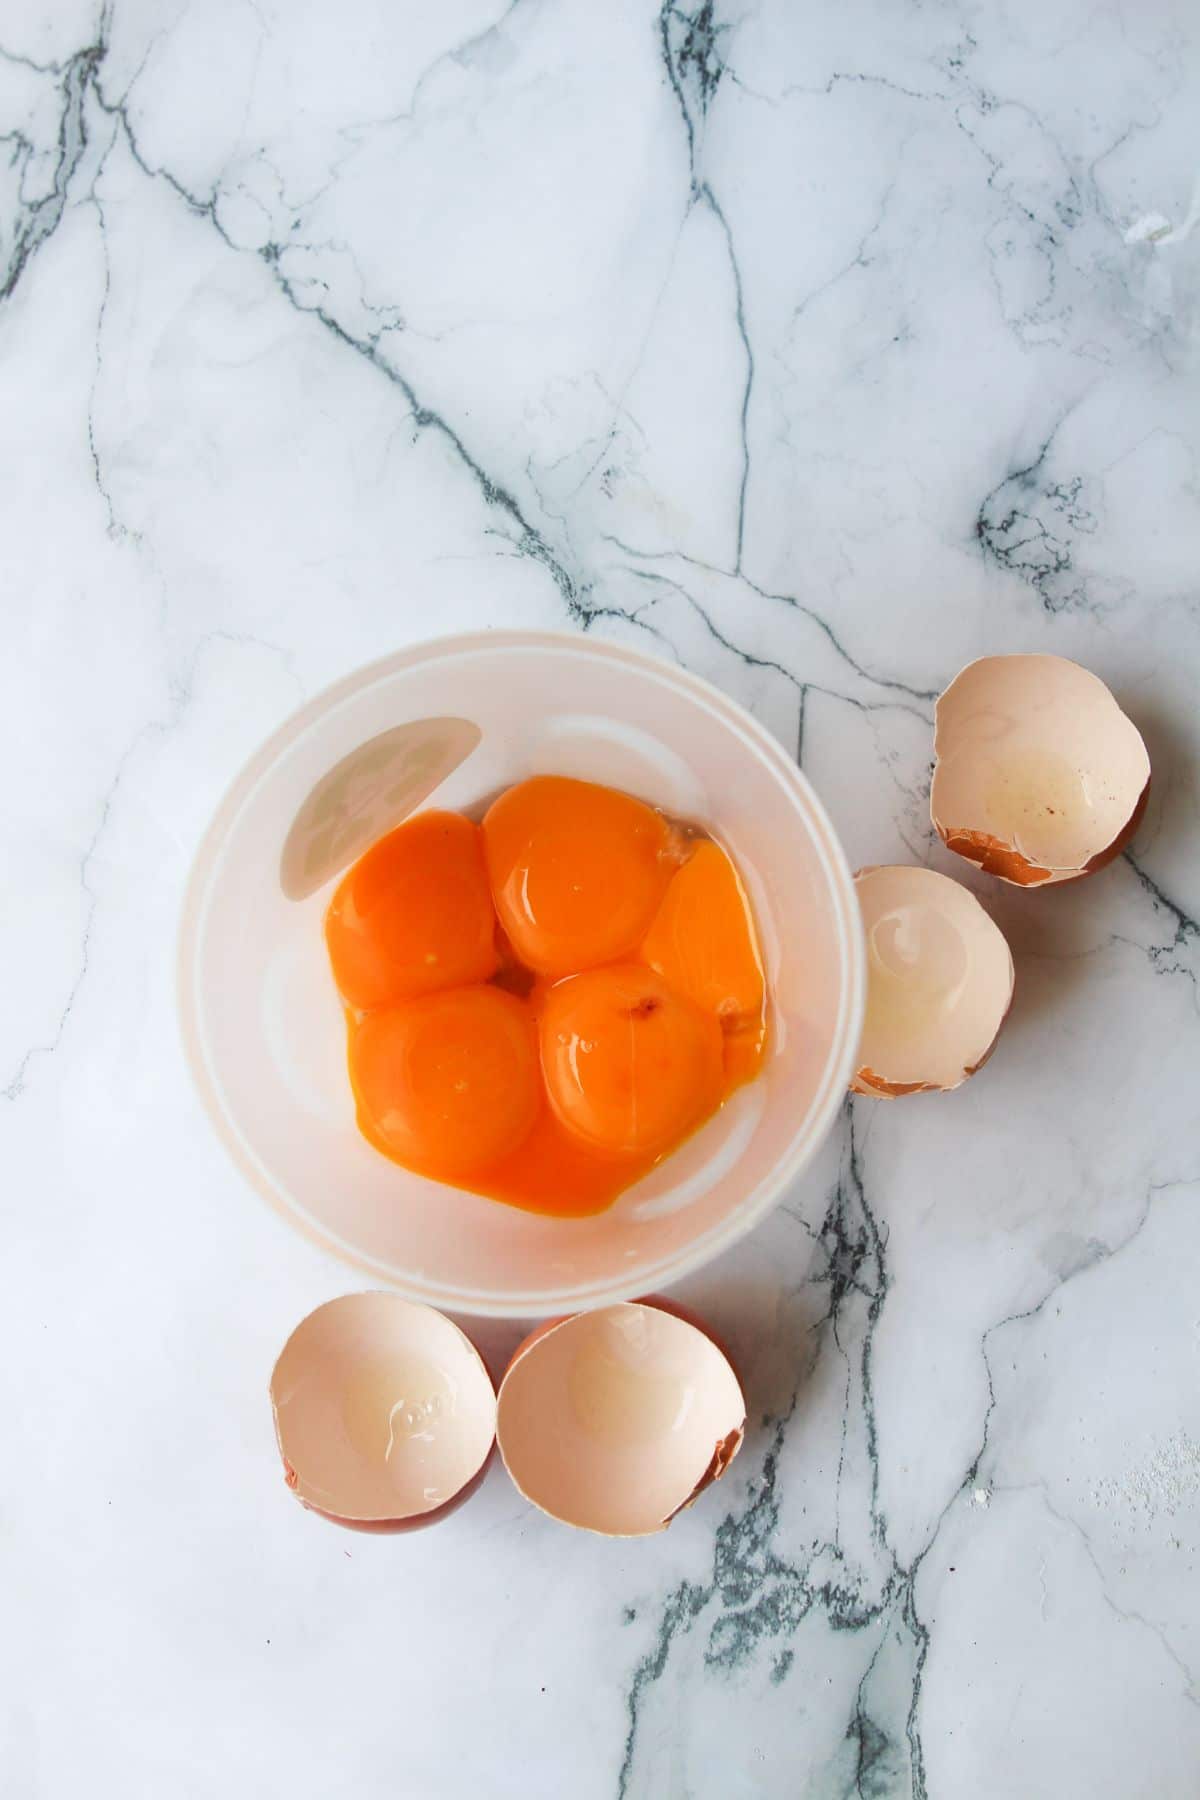 Egg yolks in a bowl next to cracked eggshells